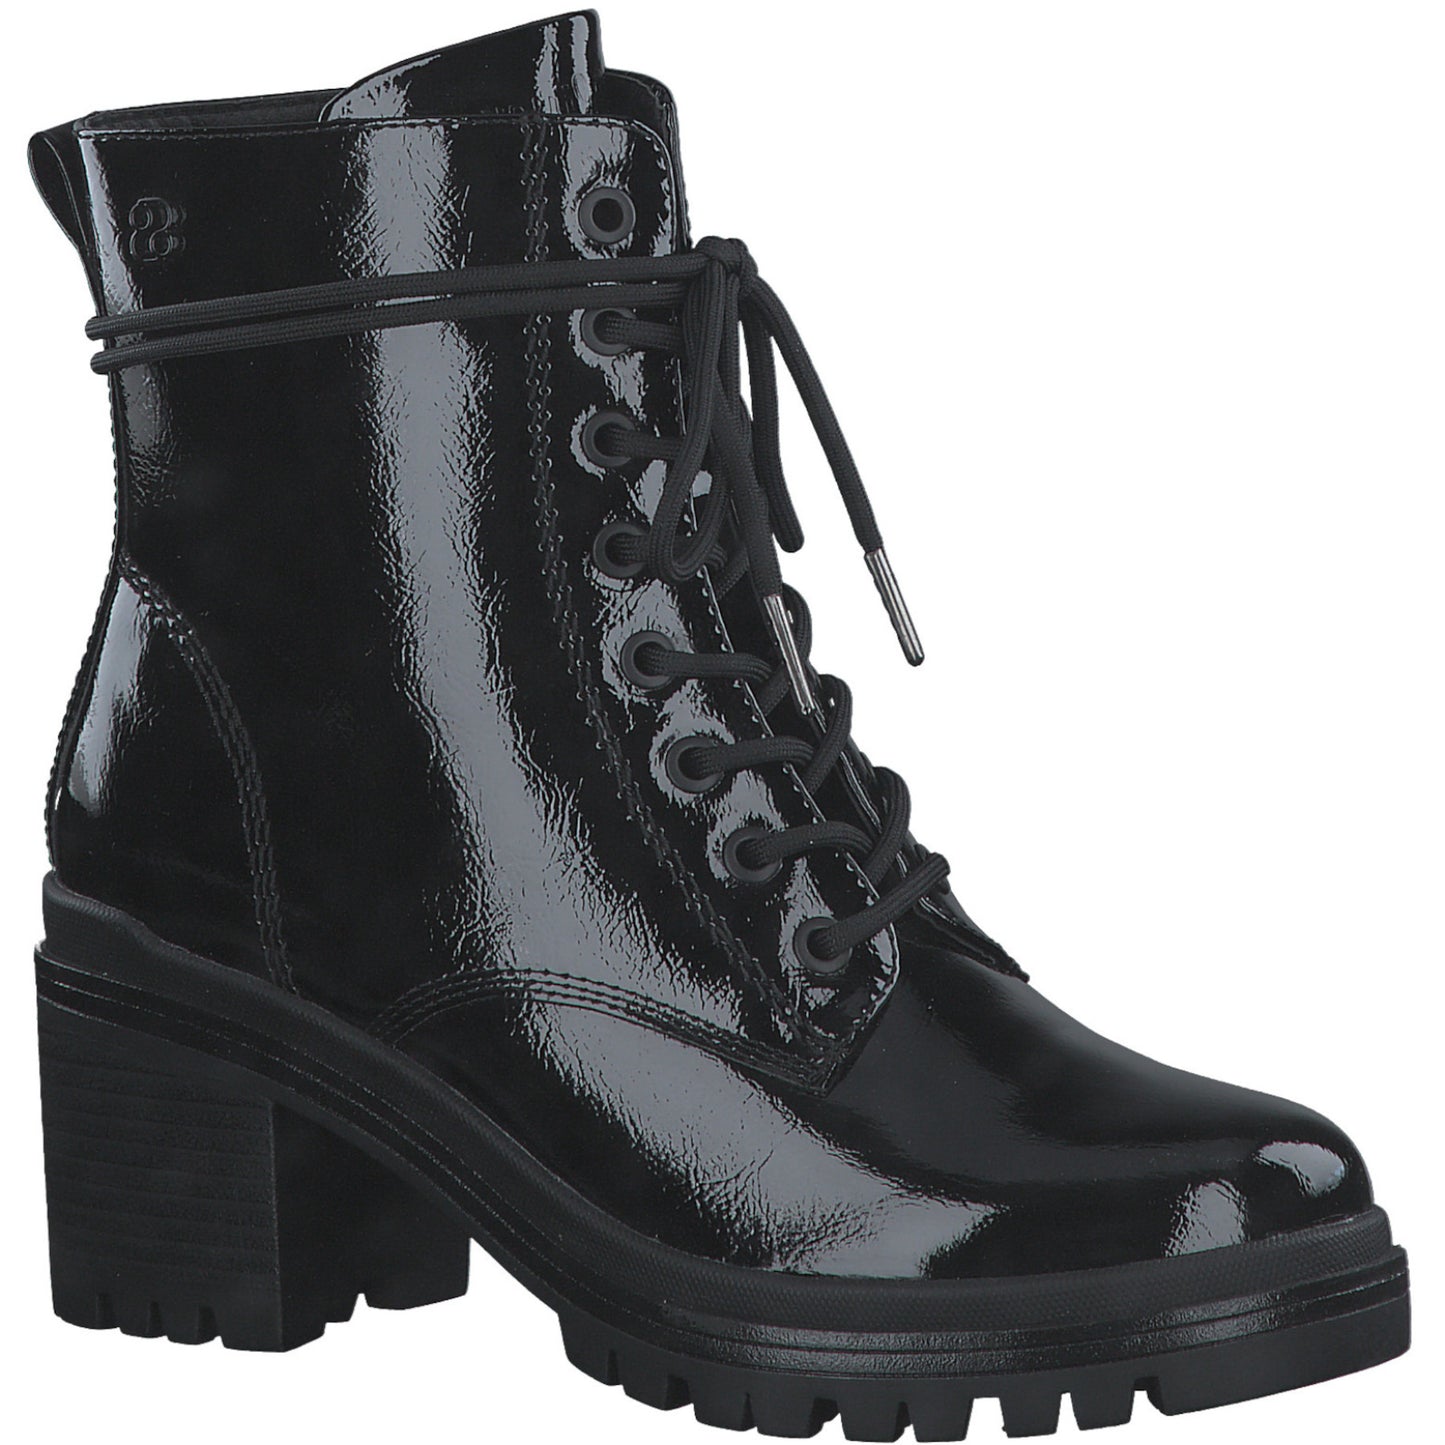 S Oliver 5-25229-41 018 Black Patent Boots